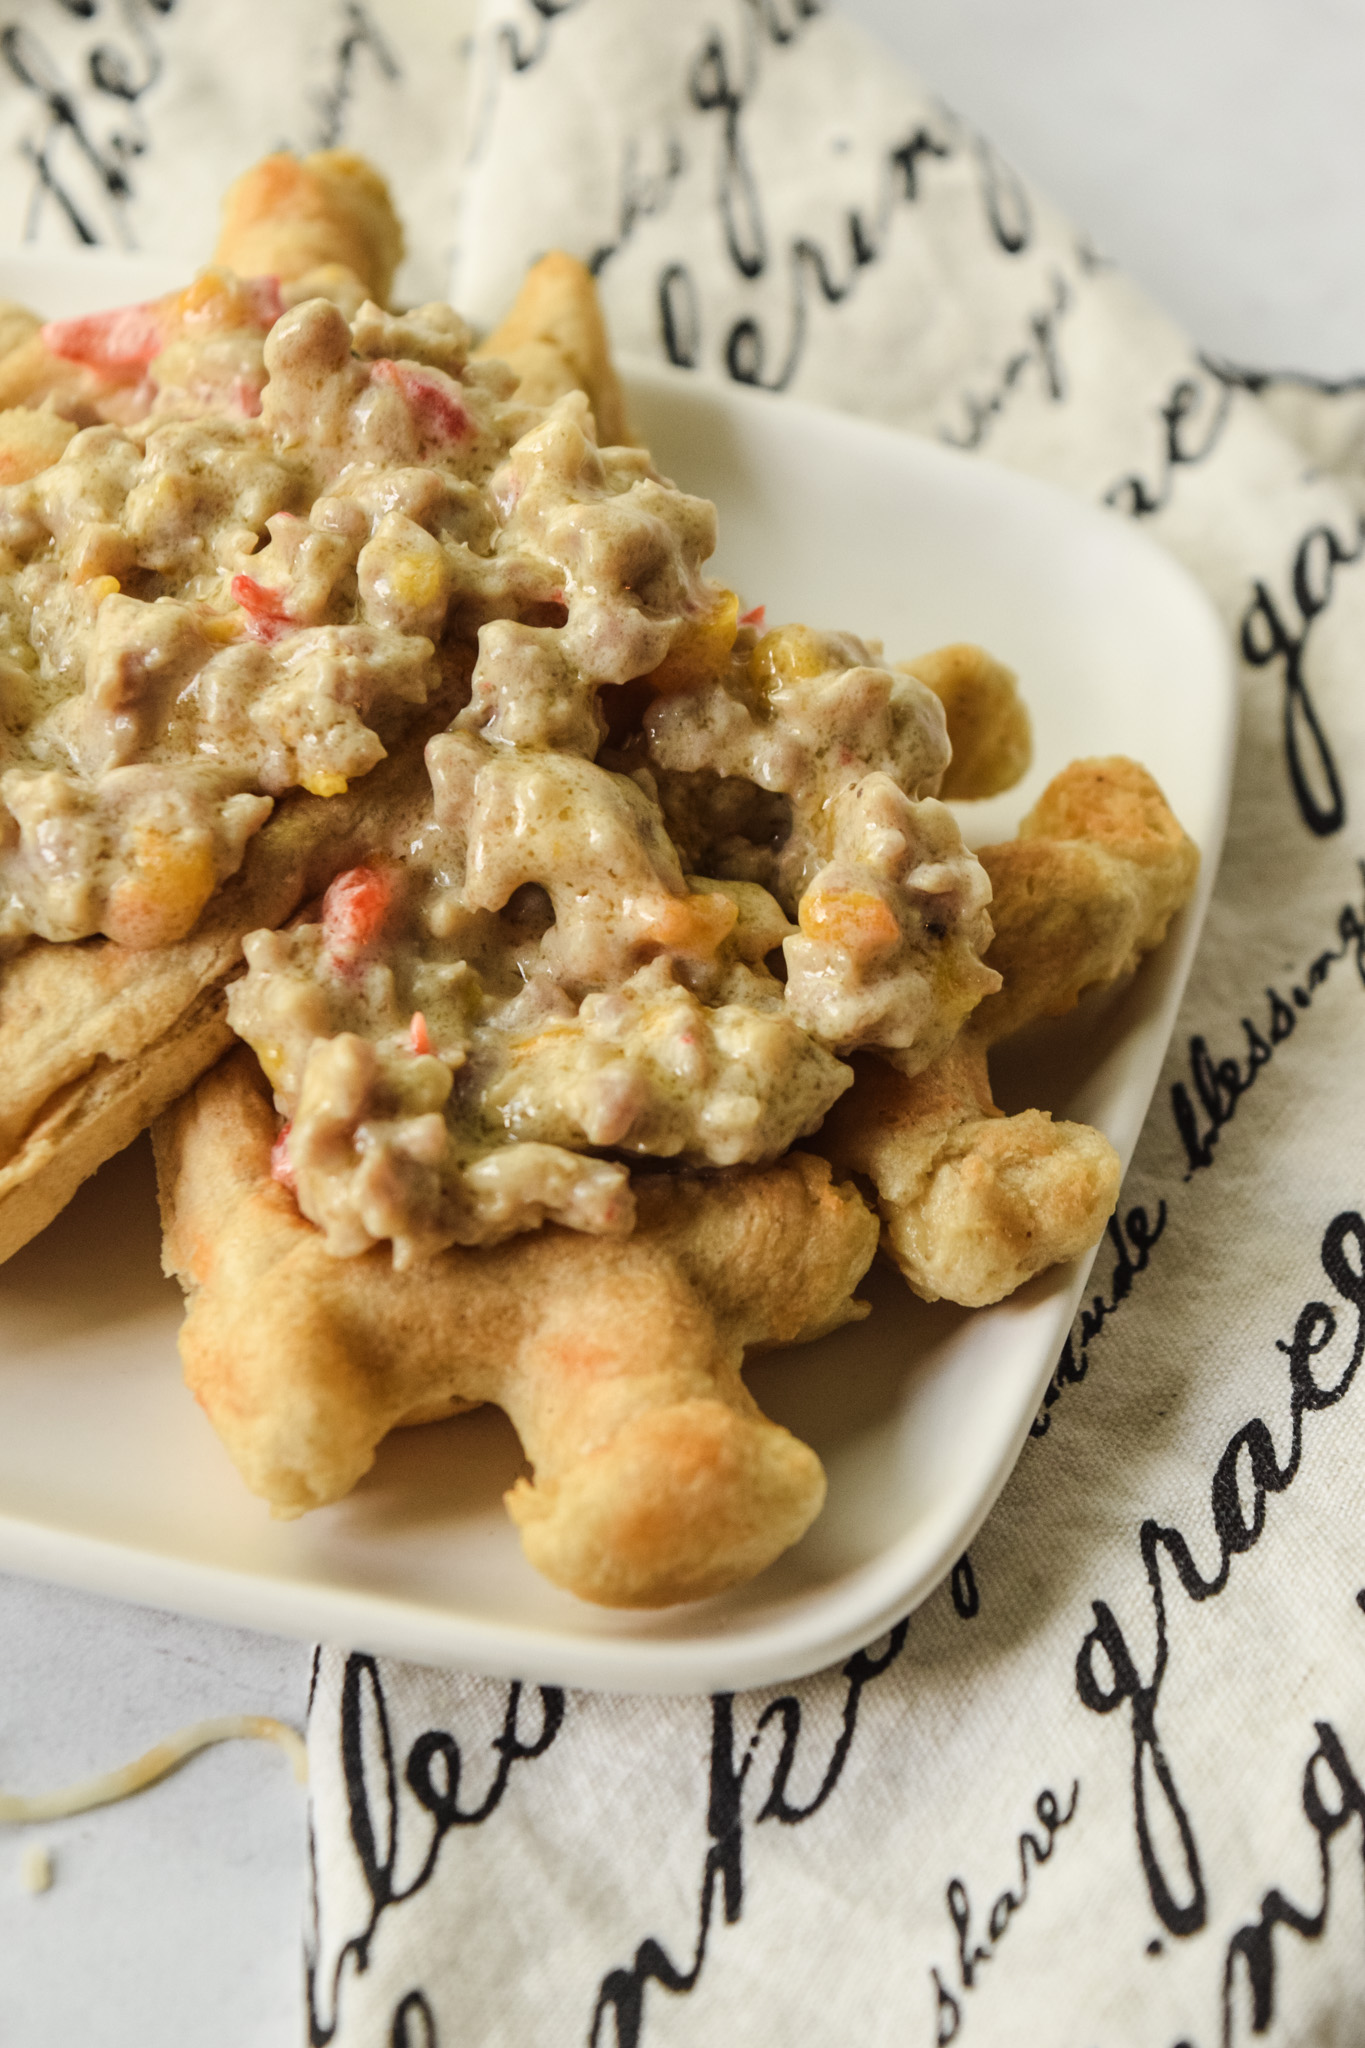 sausage gravy served on top of gluten free cheddar waffles